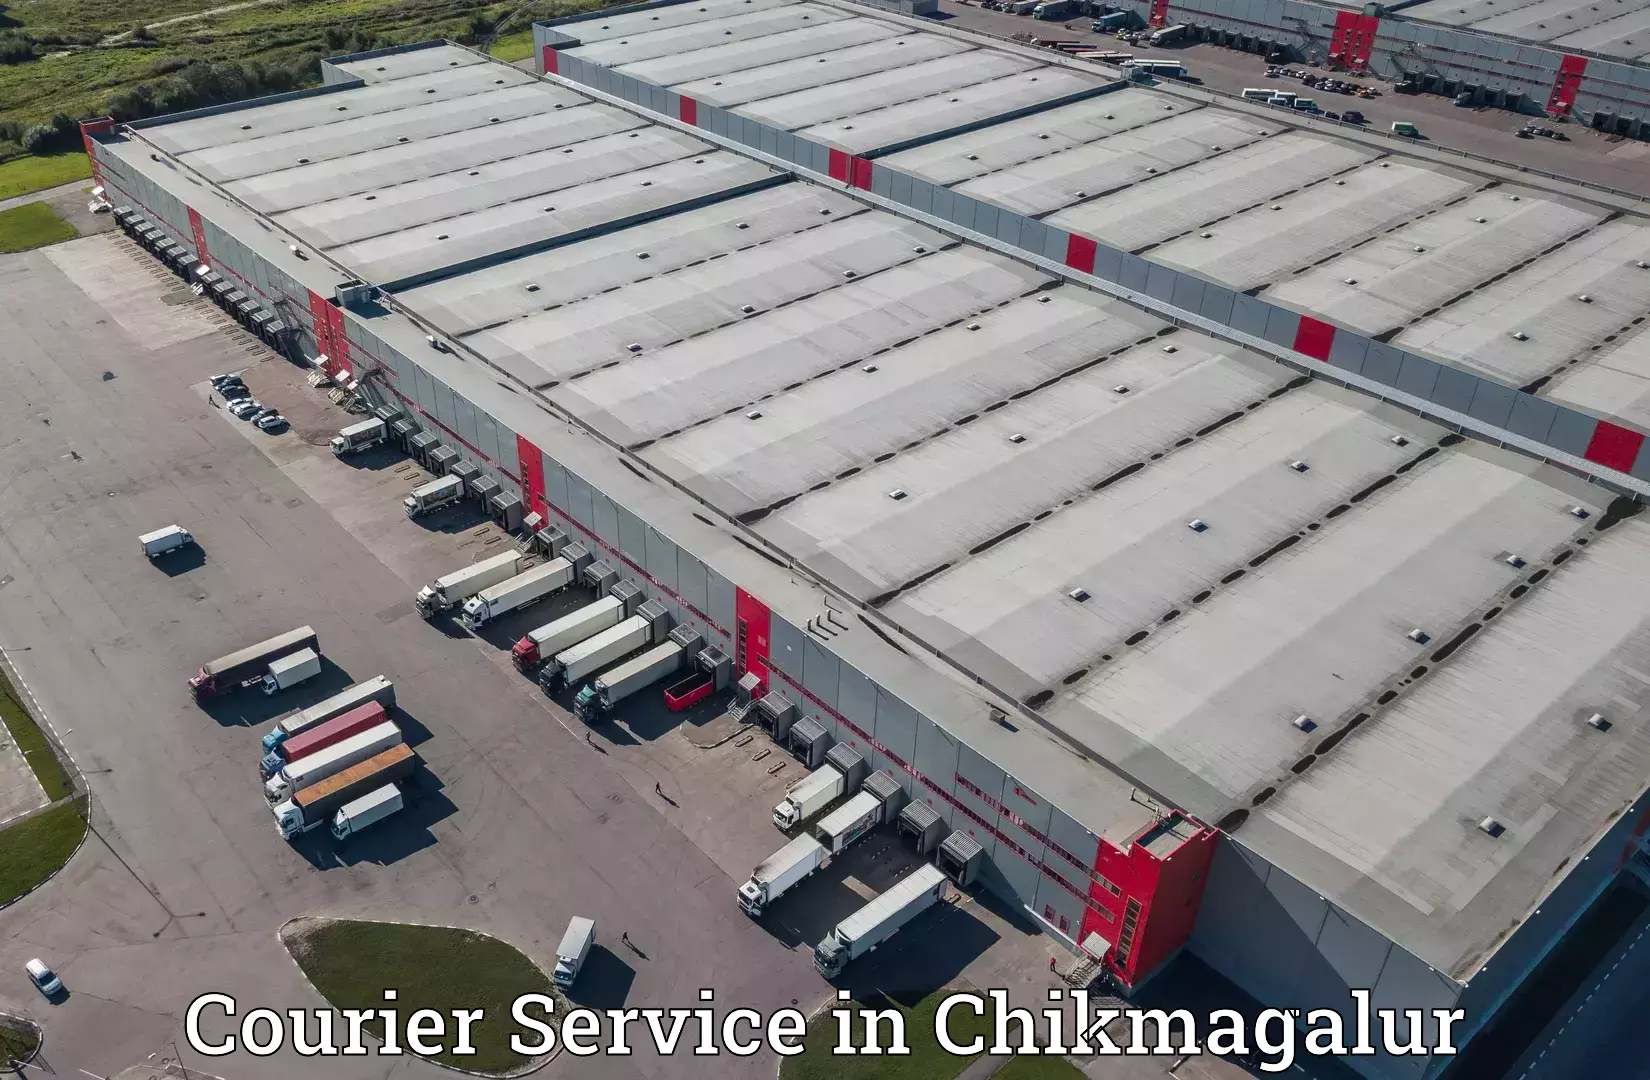 Efficient shipping operations in Chikmagalur